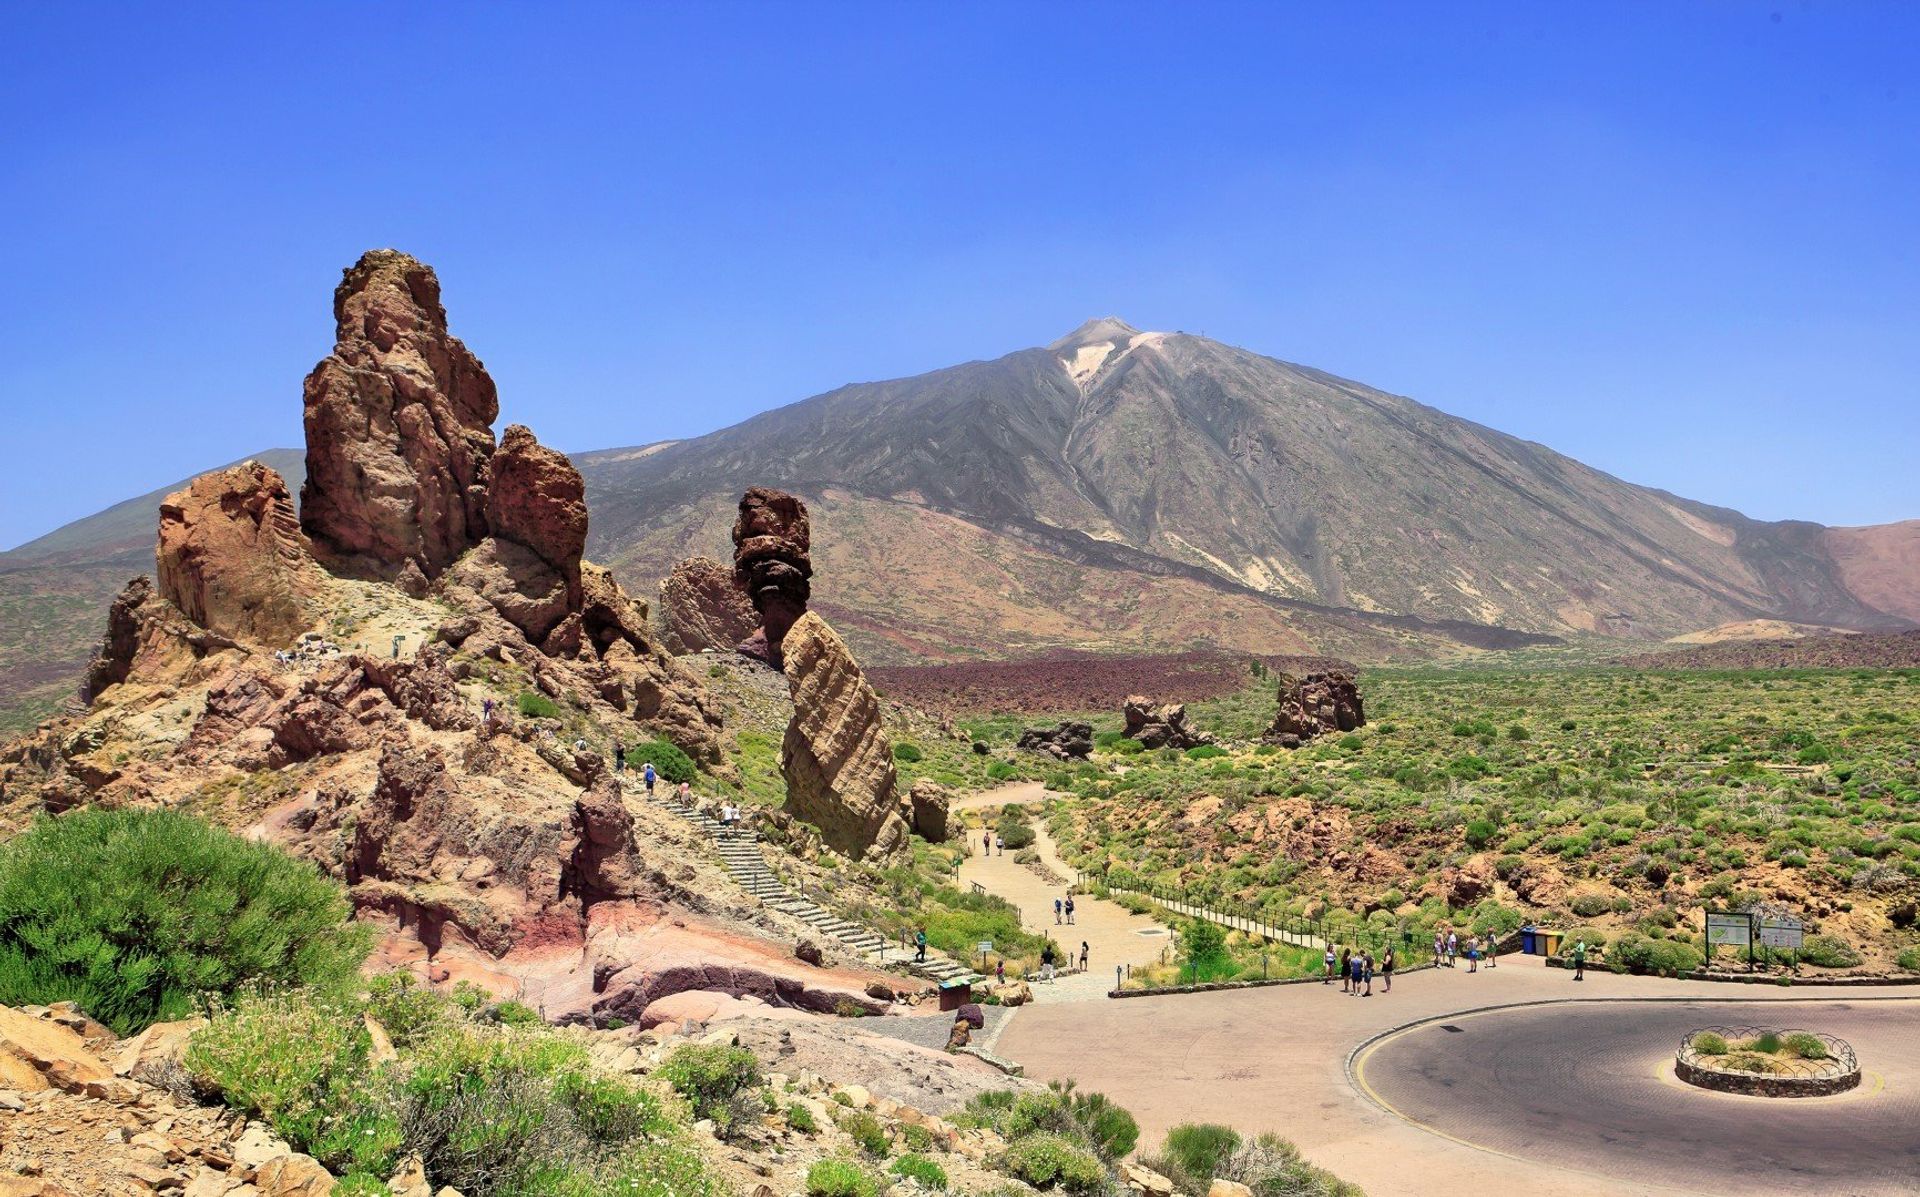 Spain's highest mountain, Pico del Teide in Tenerife, surrounded by the impressive rocky landscape